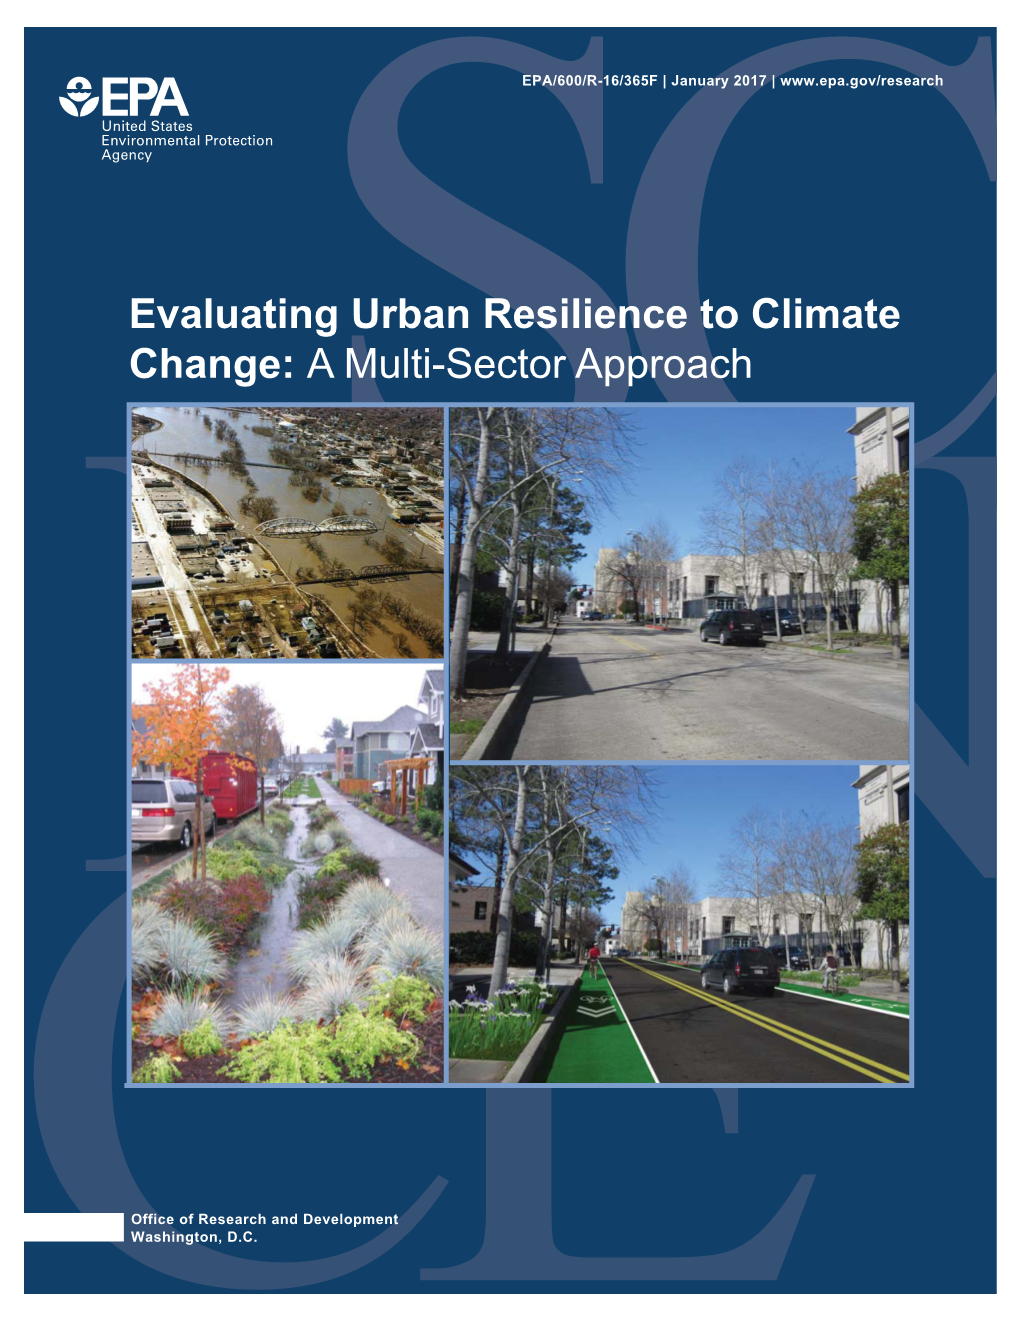 Evaluating Urban Resilience to Climate Change: a Multi-Sector Approach